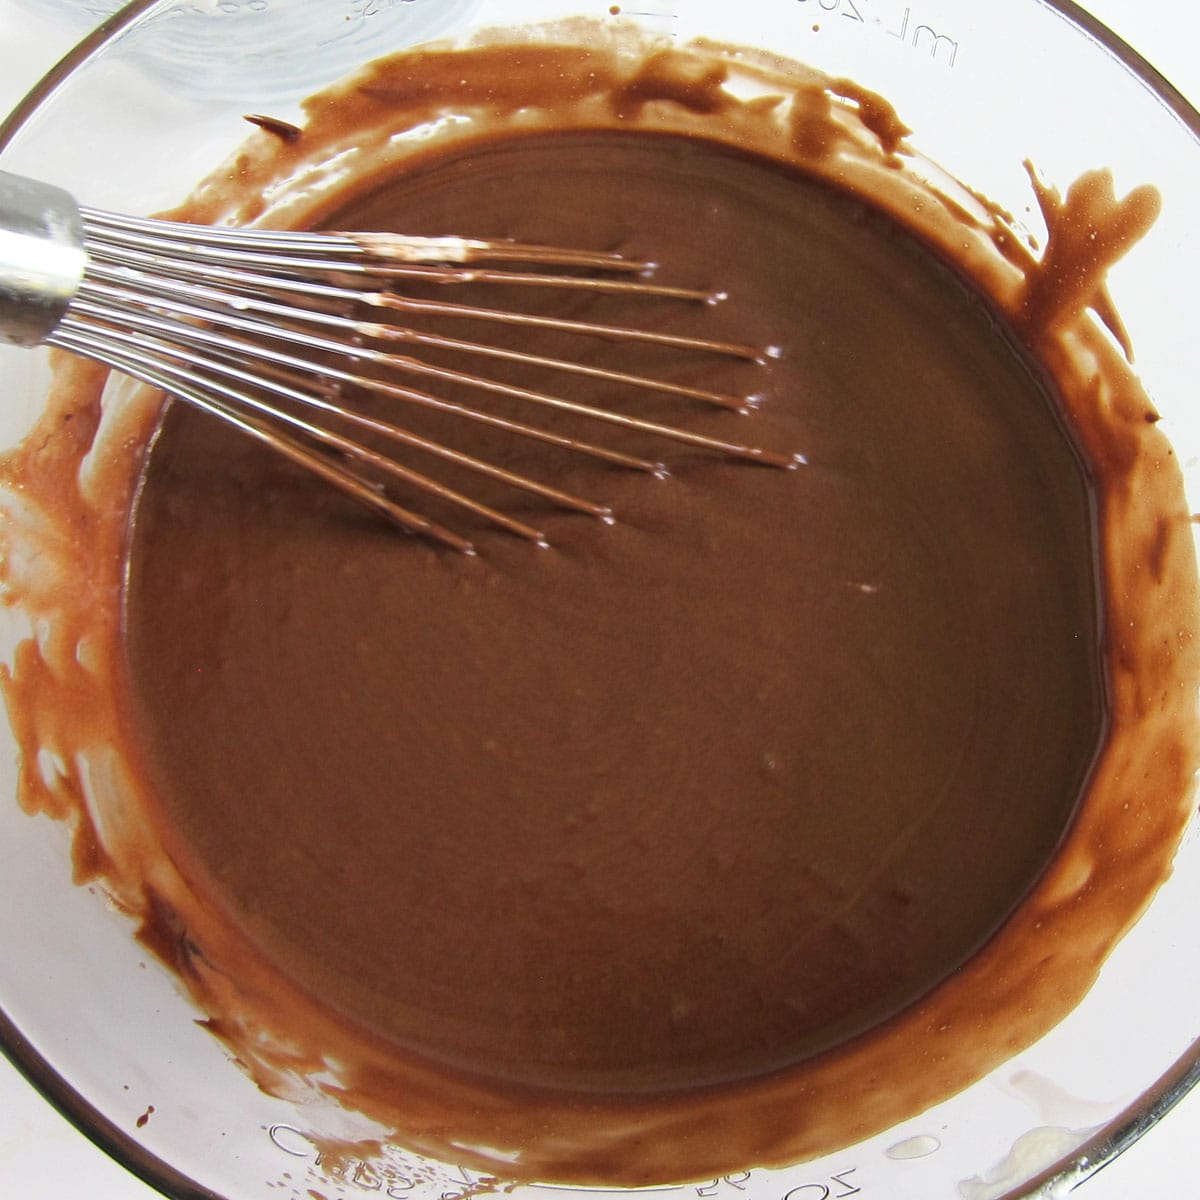 Chocolate mousse blended with a whisk in a mixing bowl.